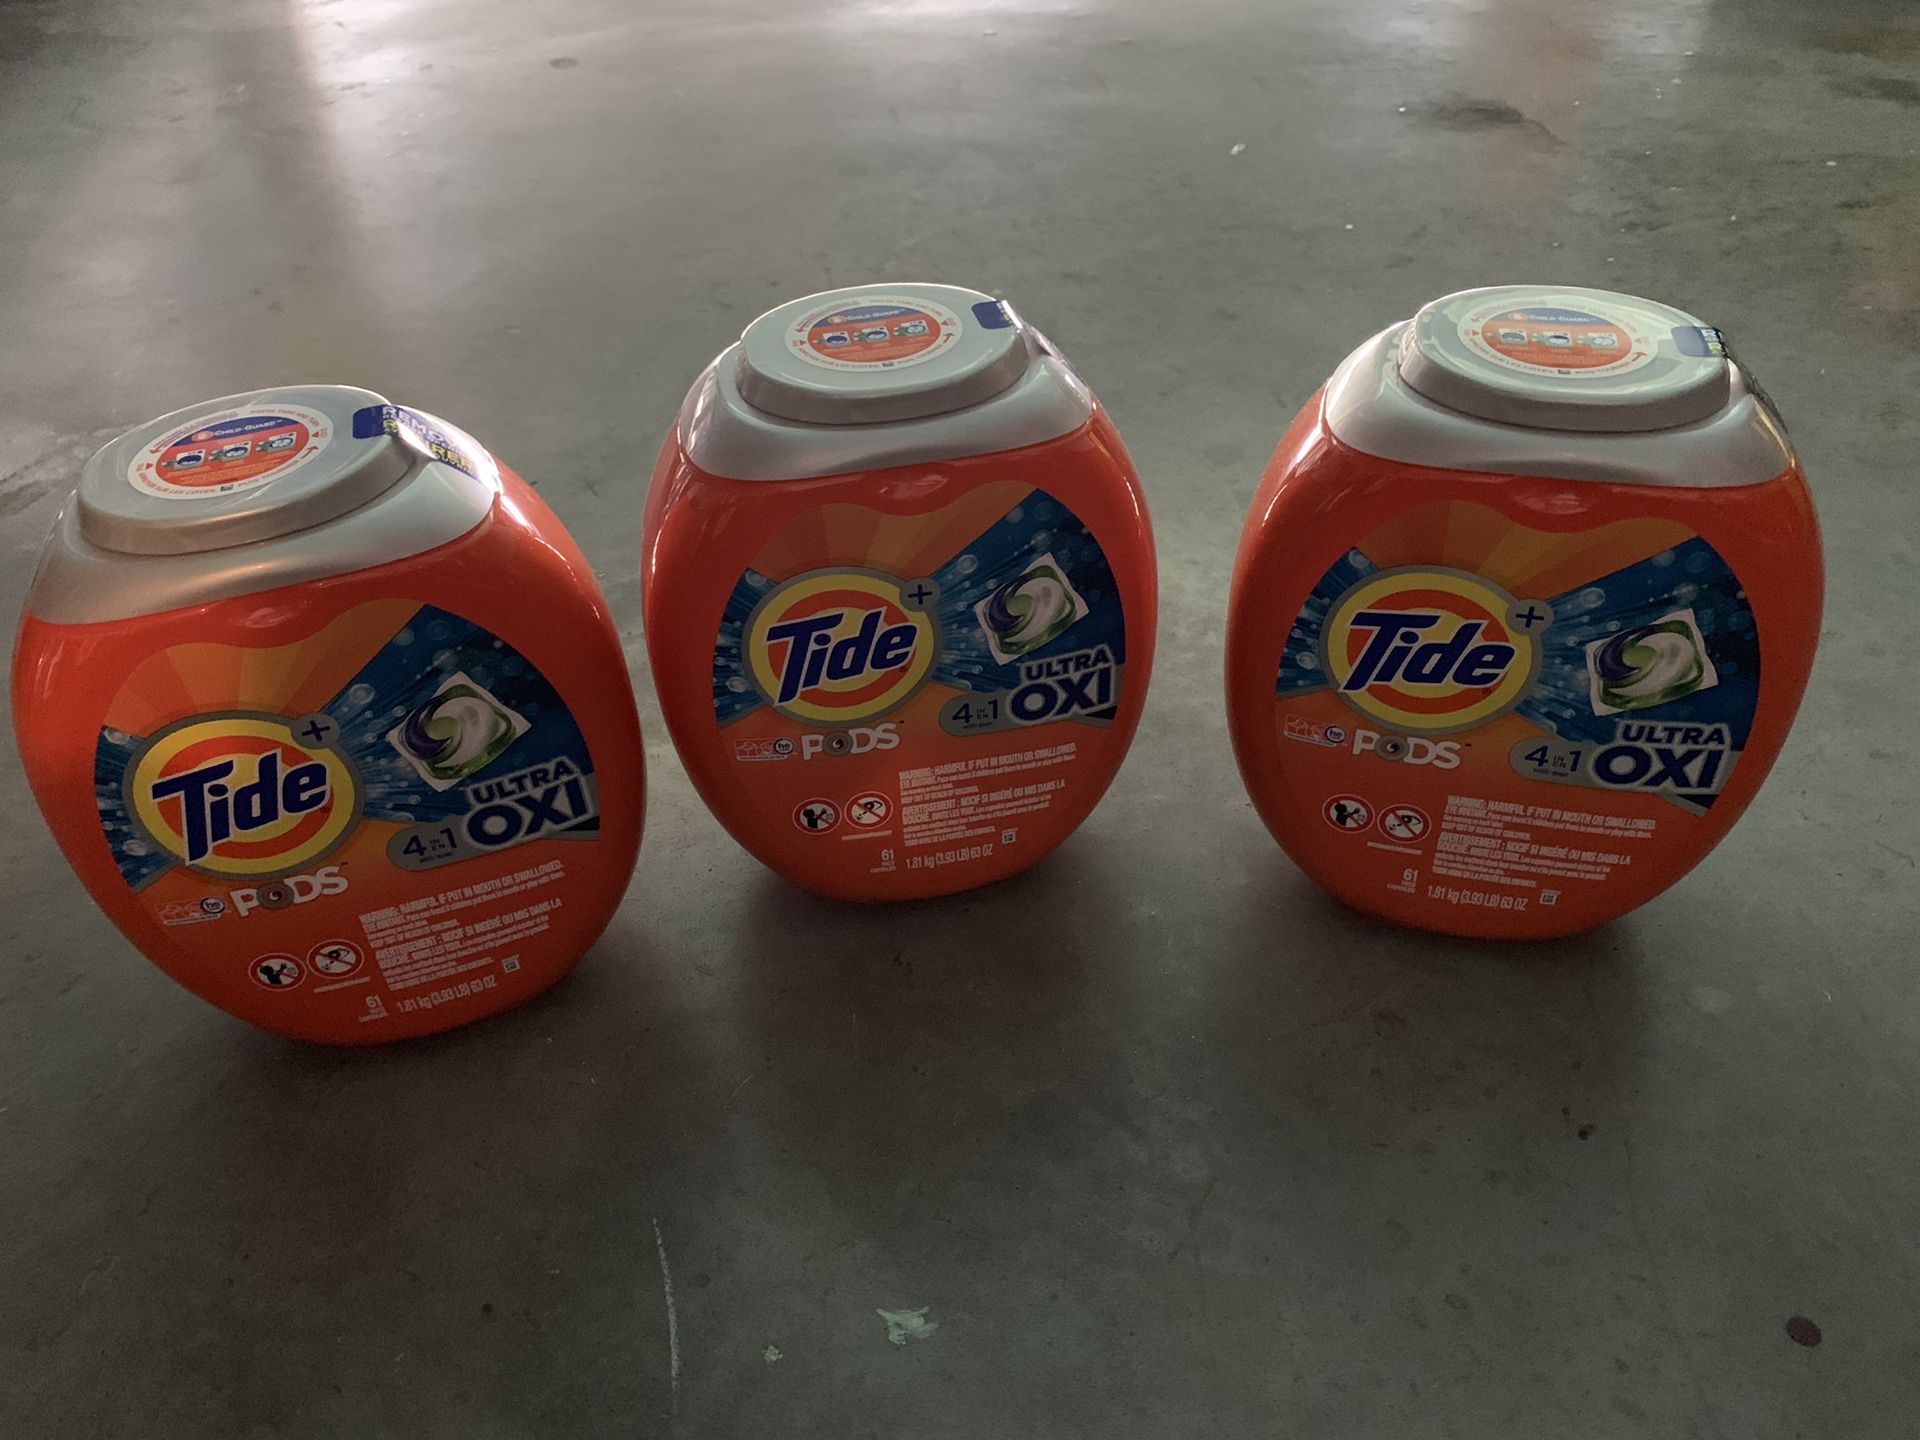 New Tide PODS Ultra OXI laundry detergent pacs. With 10x cleaning power* and built-in pre-treaters, Tide PODS Ultra OXI